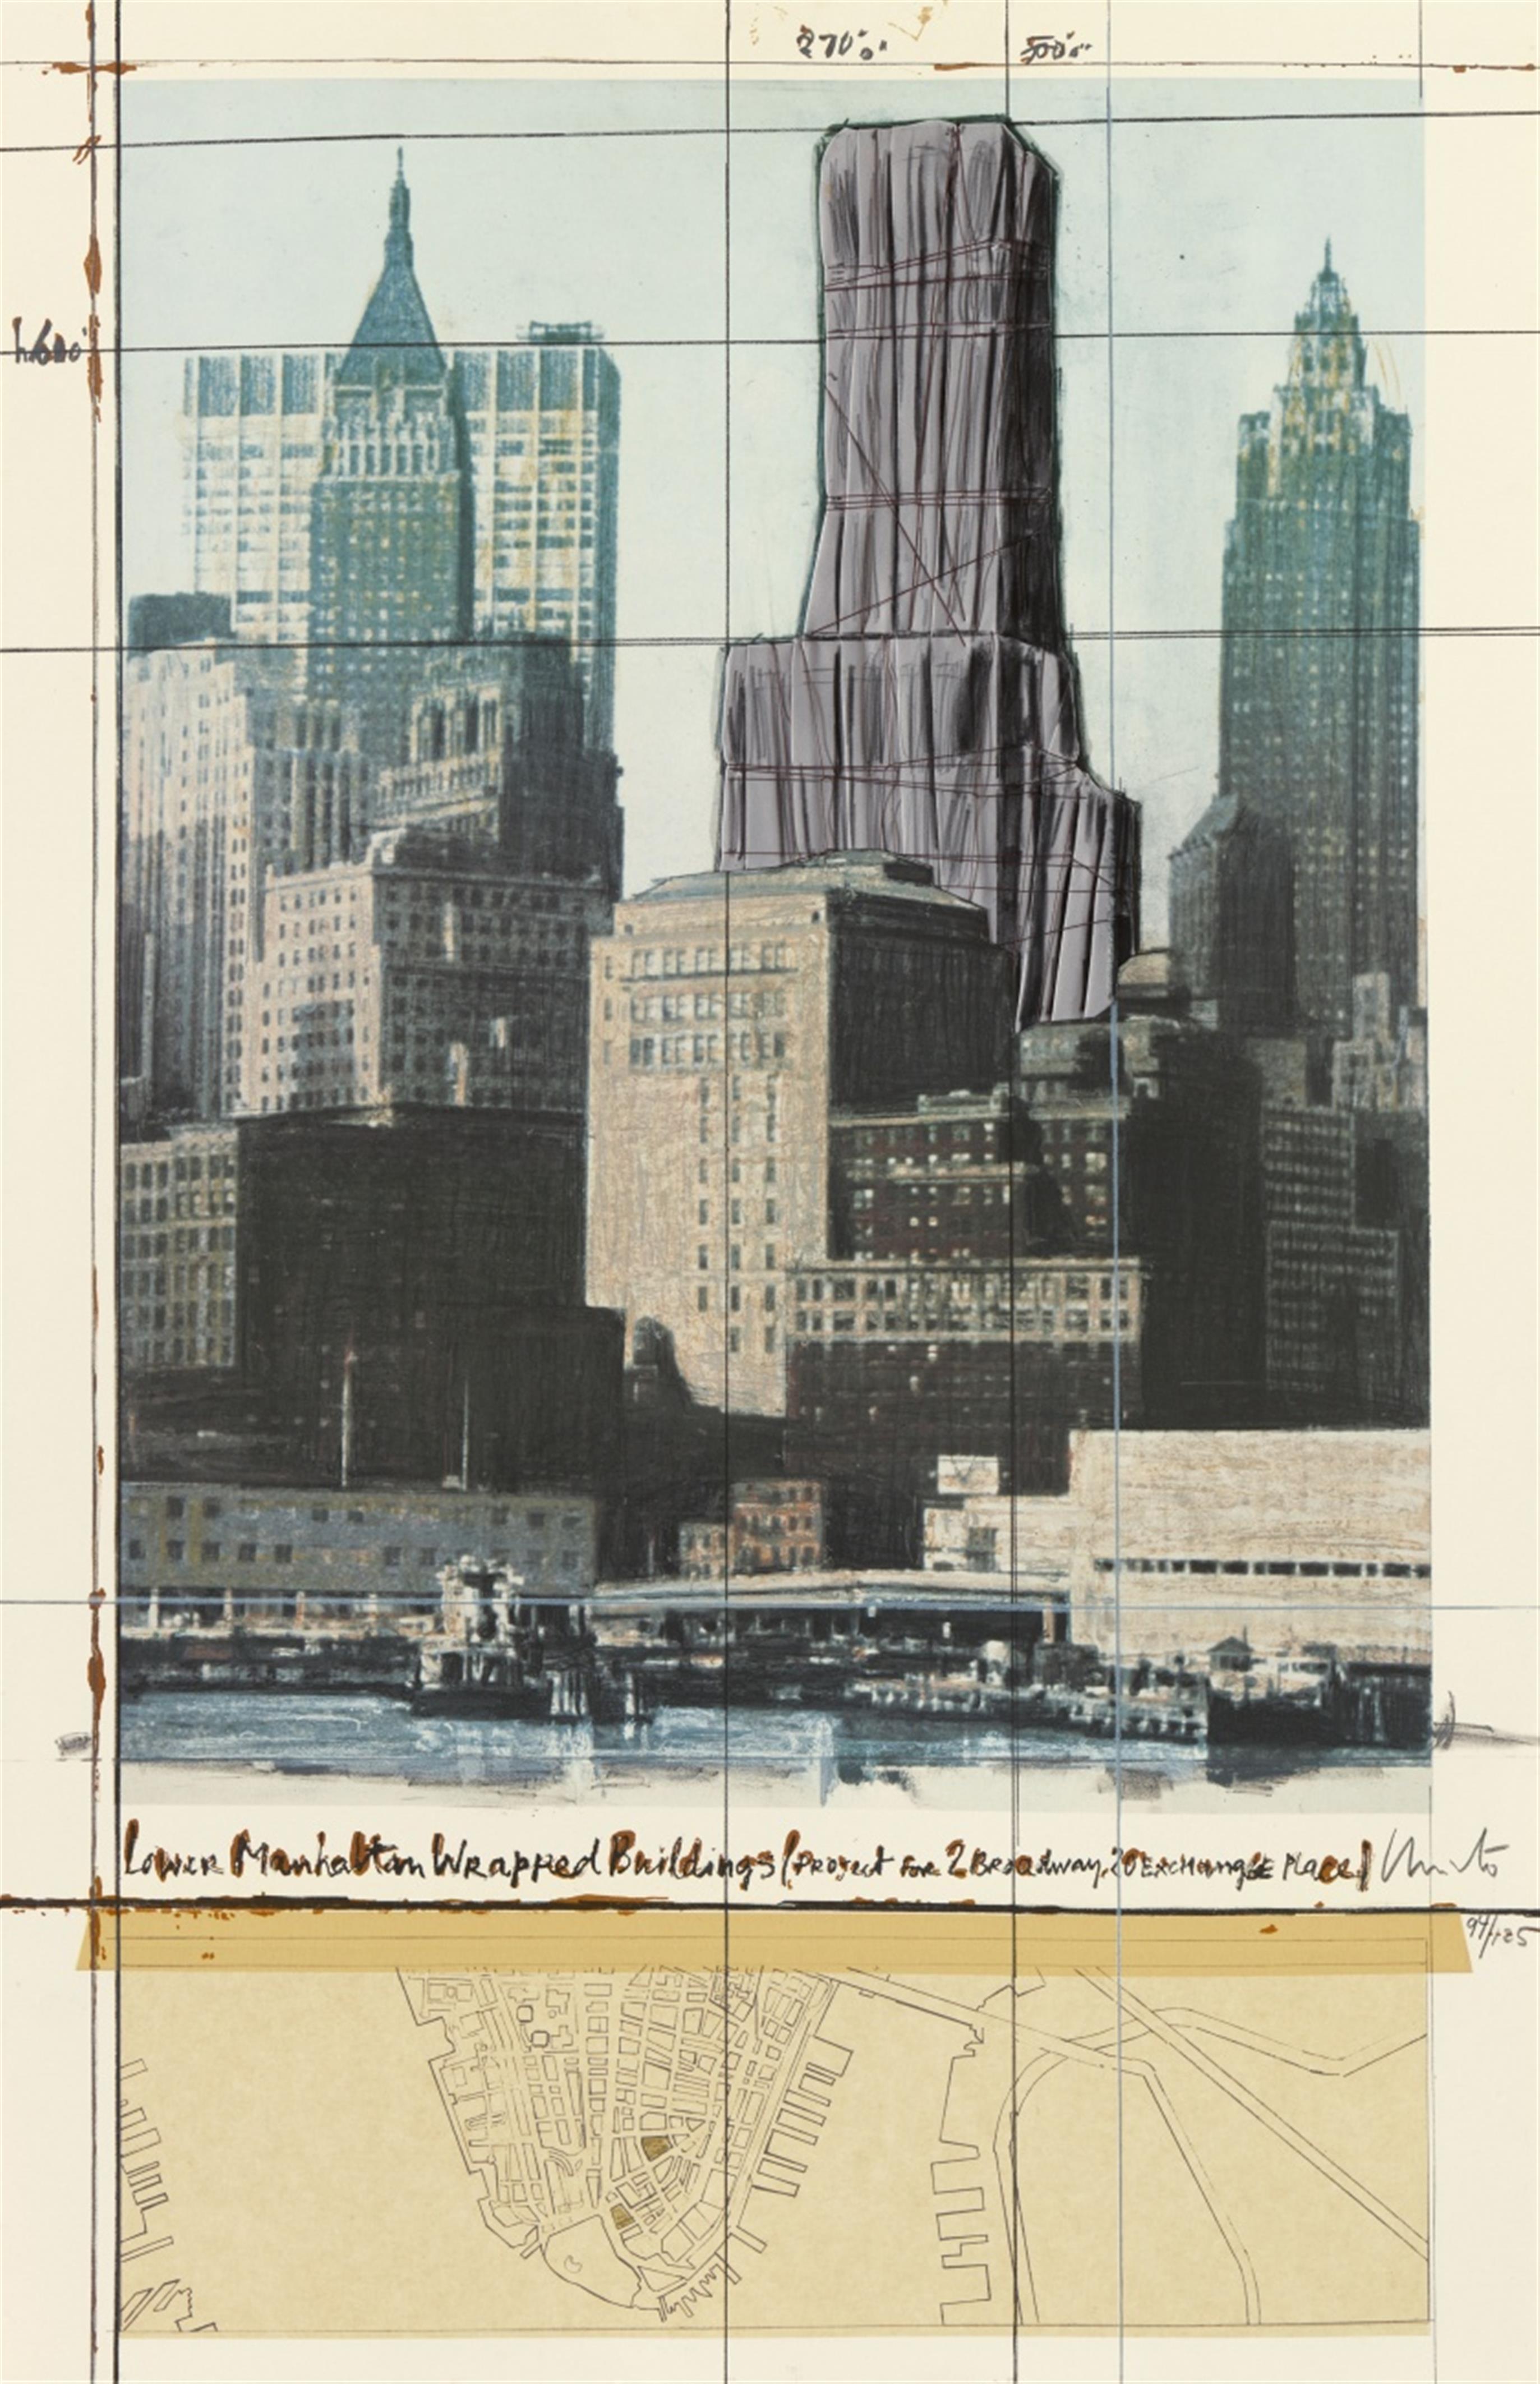 Christo - Lower Manhattan Wrapped Buildings, Project for 2 Broadway, 20 Exchange Place - image-1